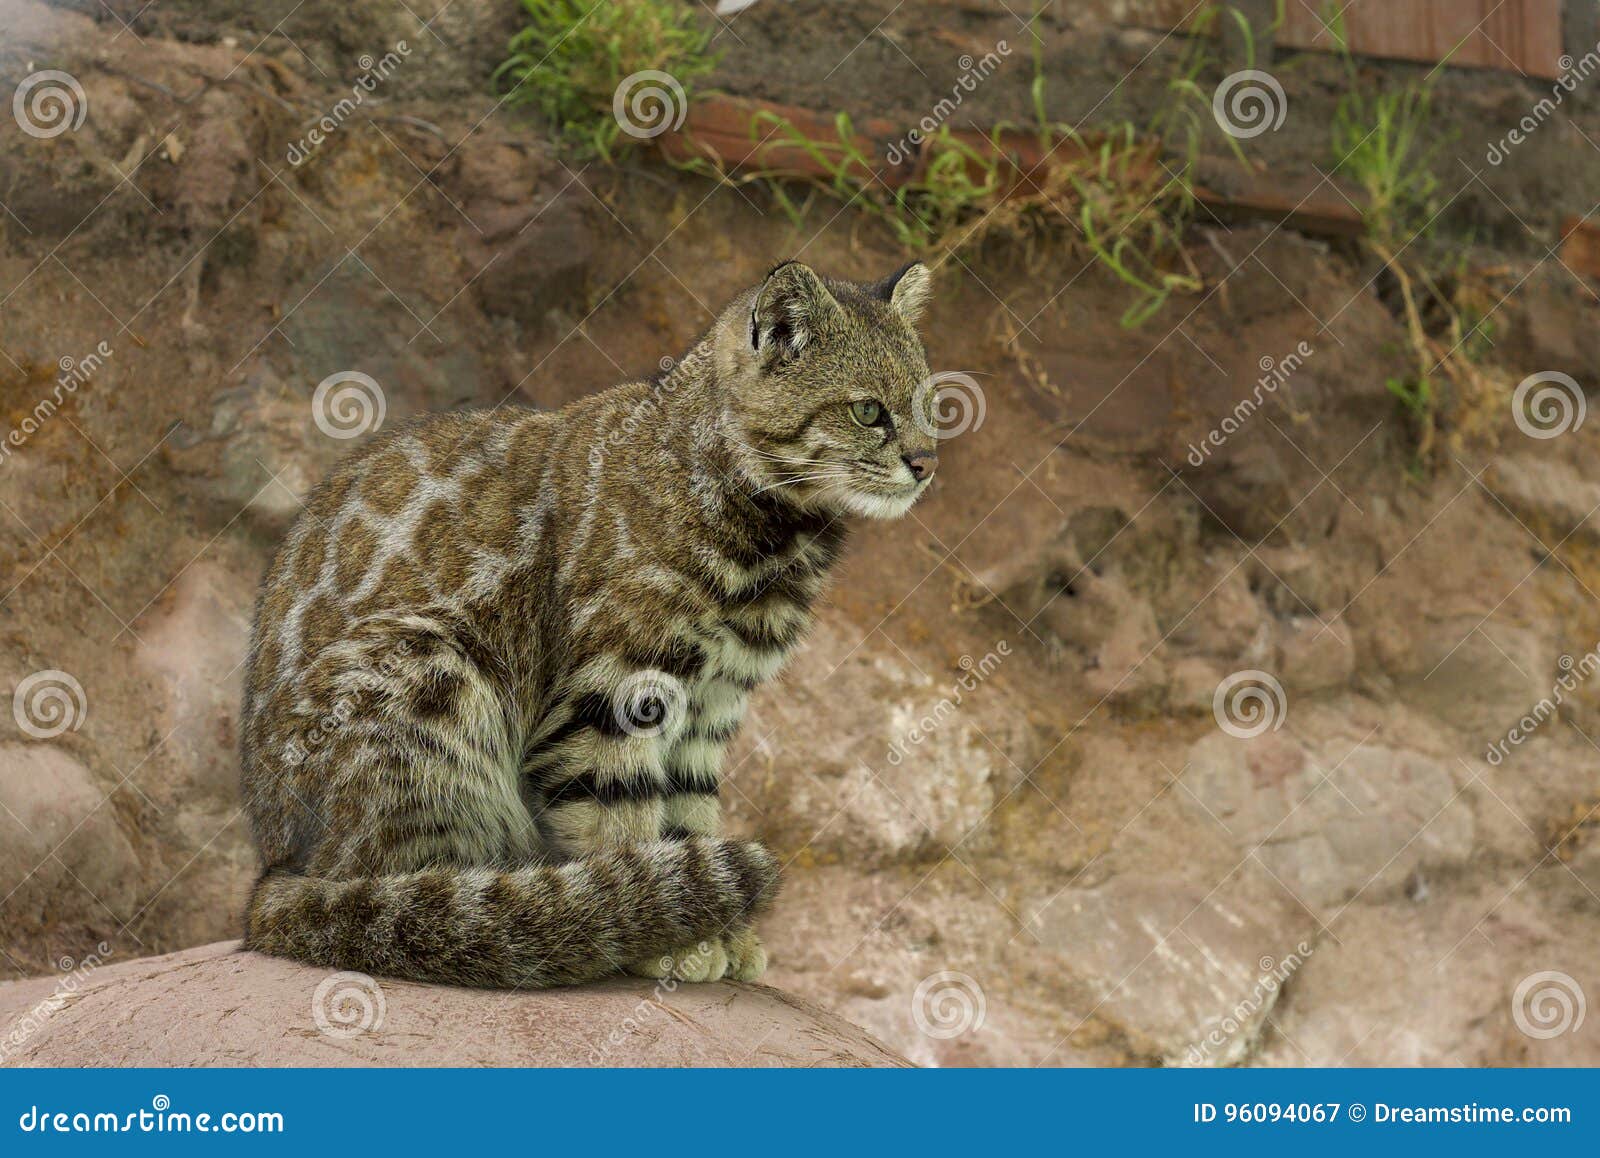 andean mountain cat